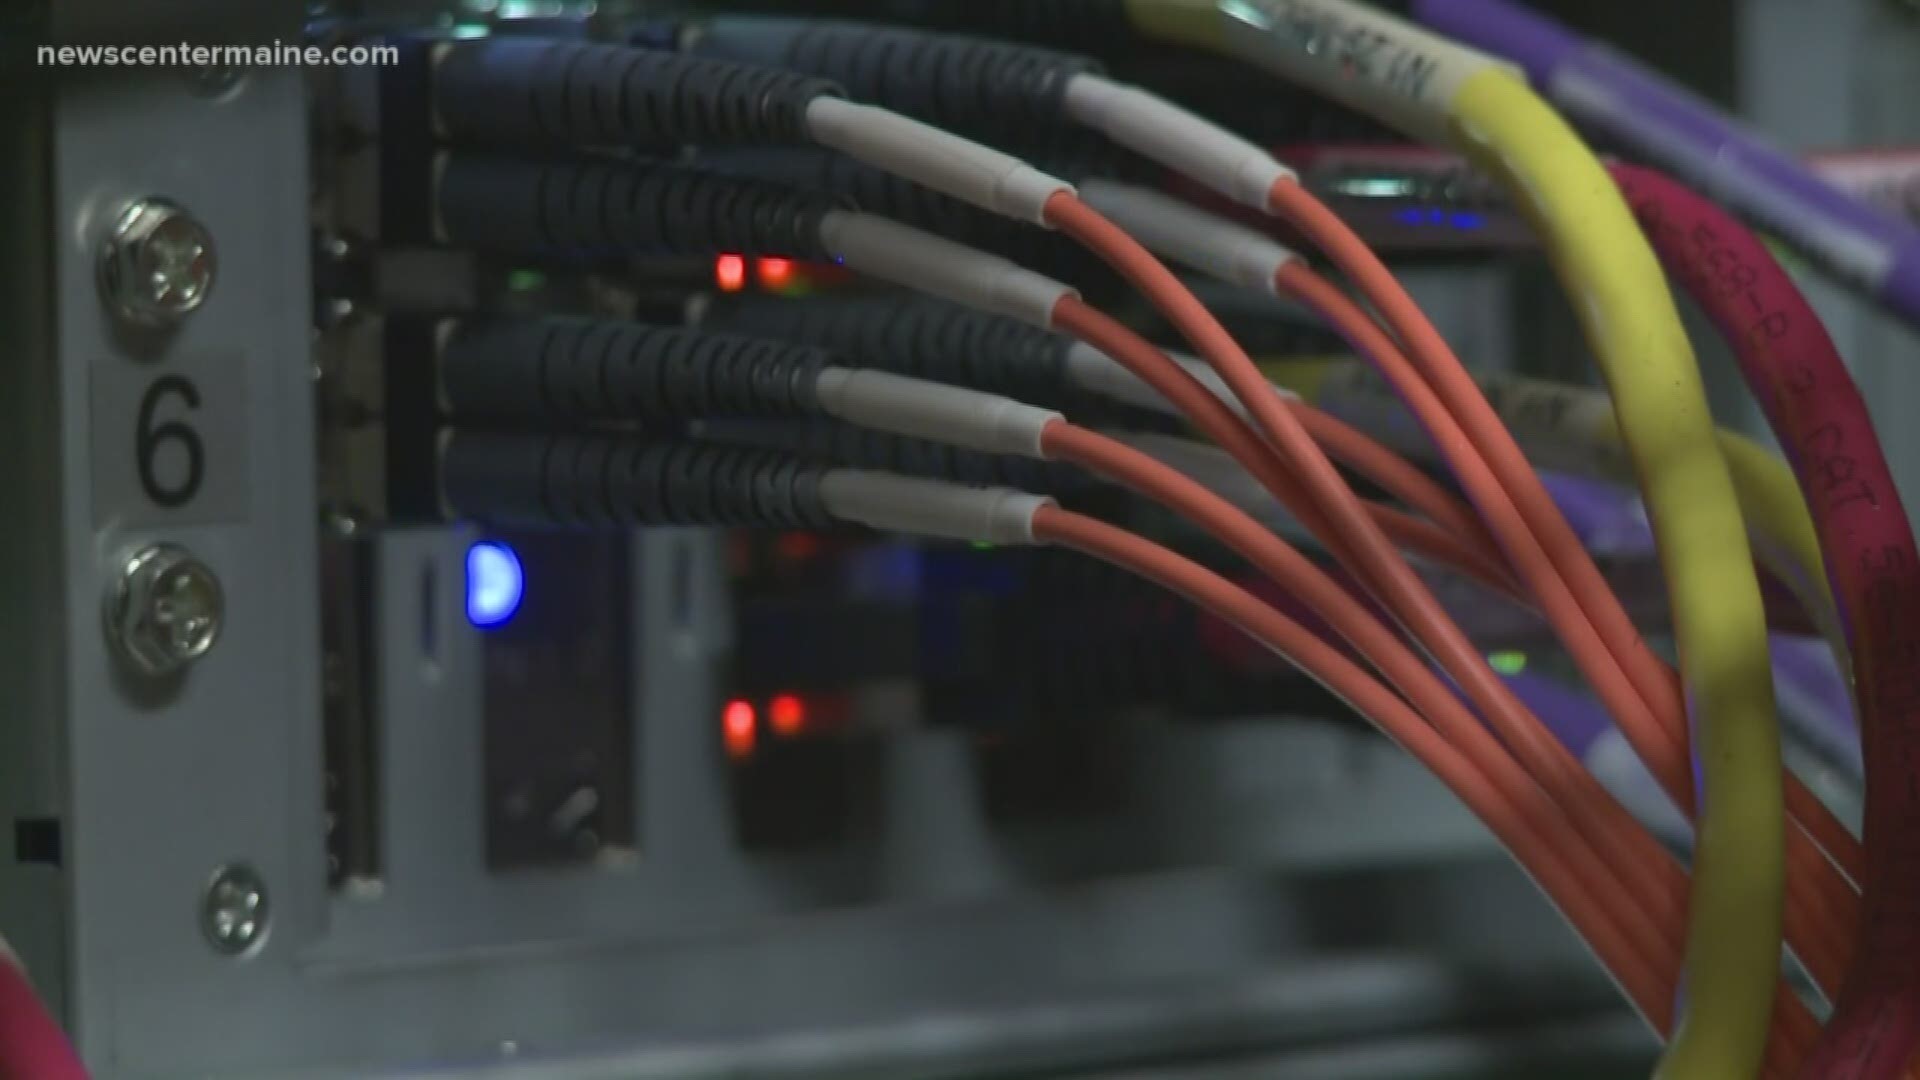 Be prepared to pay an extra 10 cents on your phone line. Starting in January, the ConnectME Authority will impose a surcharge on every wired phone line in Maine.